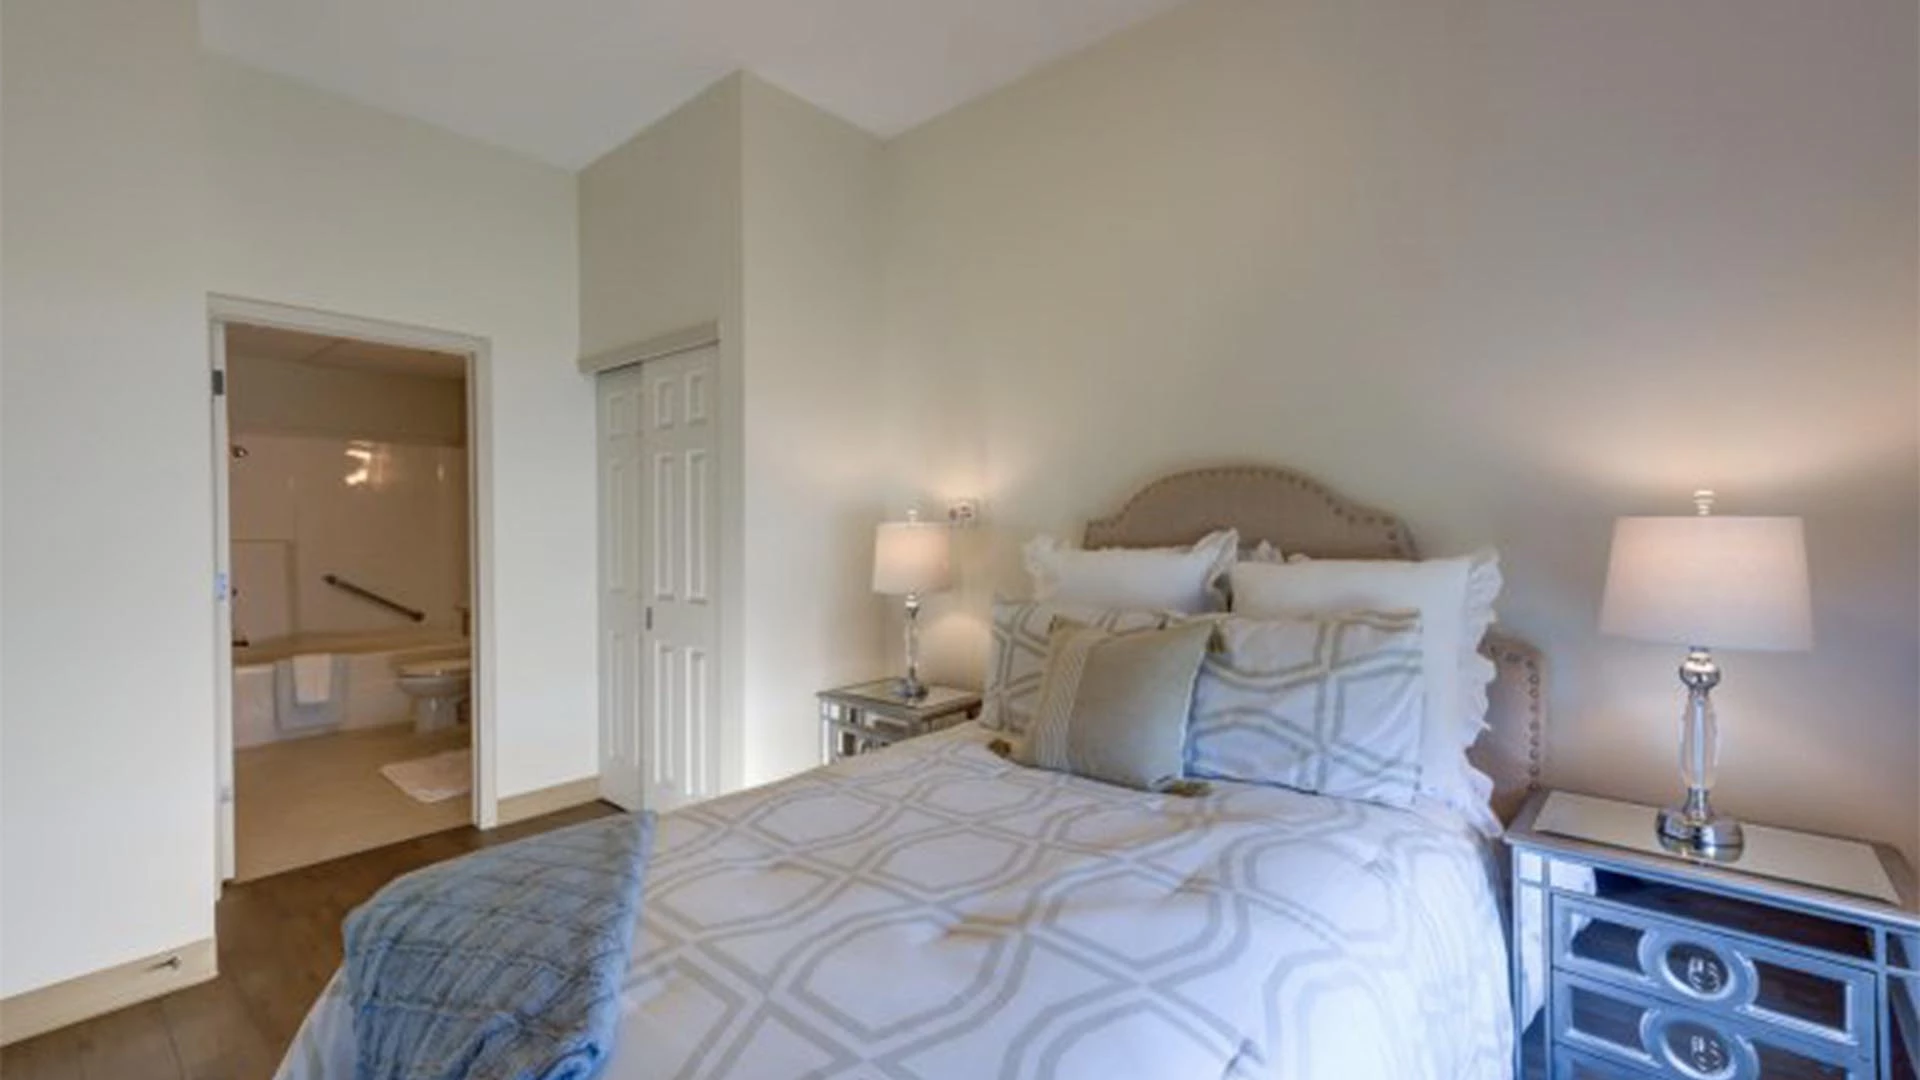 A bedroom with nightstands and bed and view of a bathroom at Rutherford Heights senior apartments